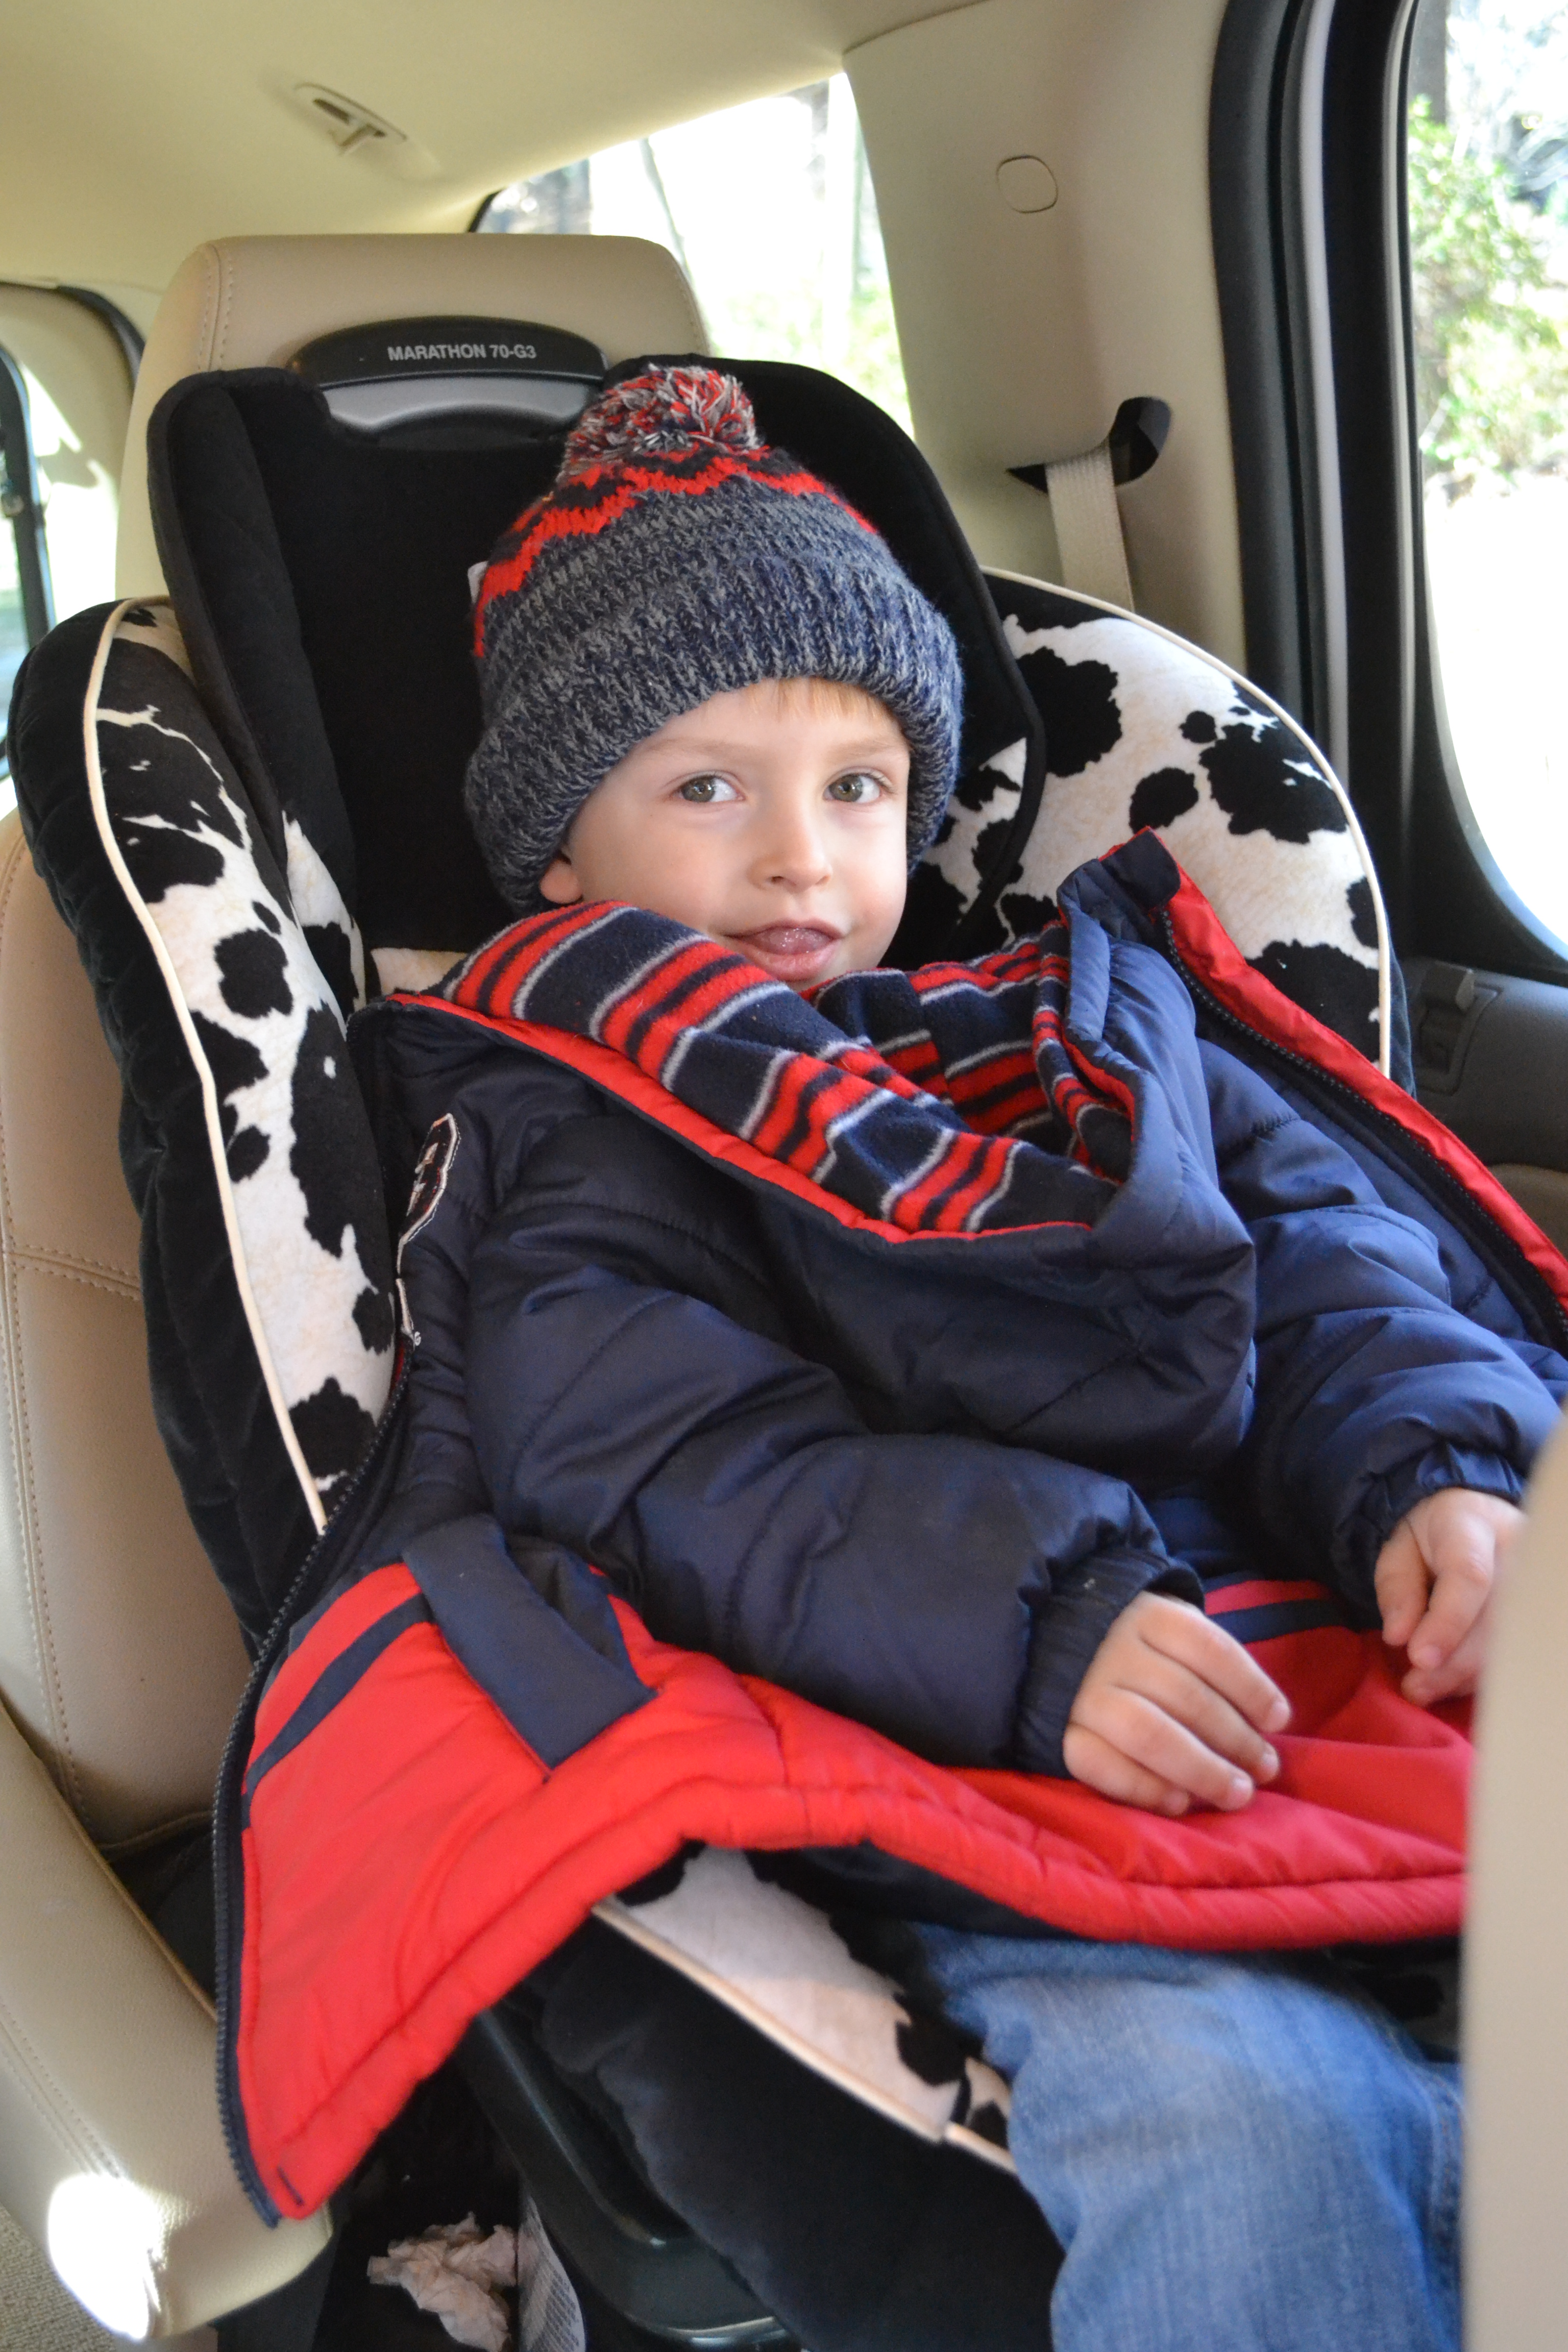 Why you should never leave your child in a jacket in a car seat